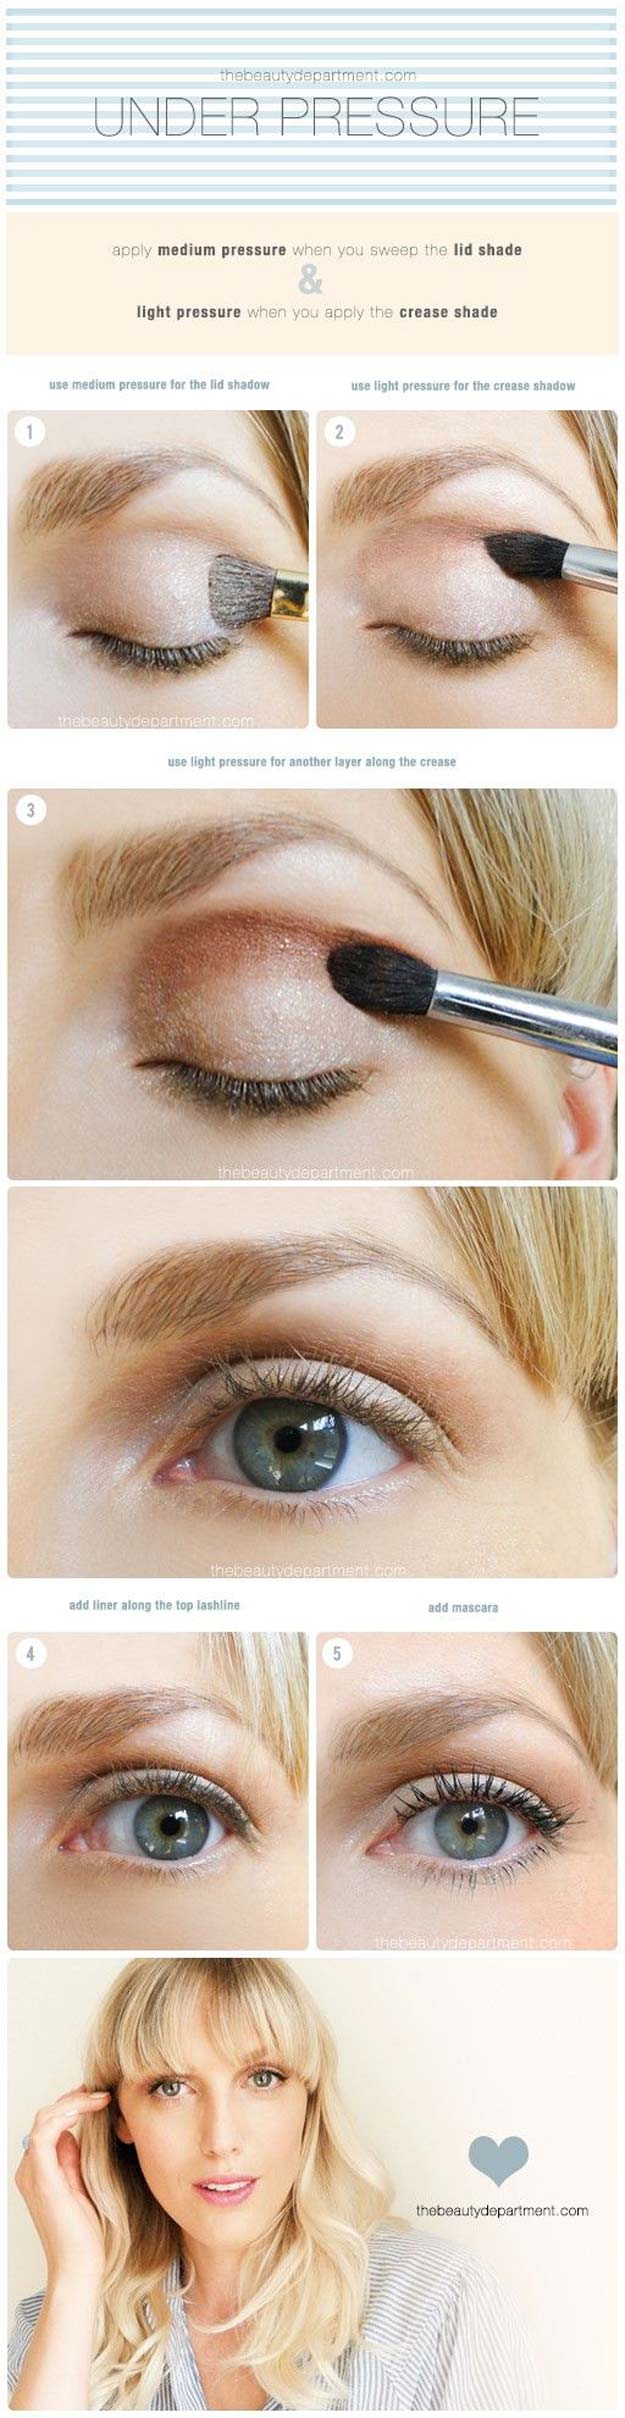 Best Eyeshadow Tutorials - The Eye Shadow Skills - Easy Step by Step How To For Eye Shadow - Cool Makeup Tricks and Eye Makeup Tutorial With Instructions - Quick Ways to Do Smoky Eye, Natural Makeup, Looks for Day and Evening, Brown and Blue Eyes - Cool Ideas for Beginners and Teens 